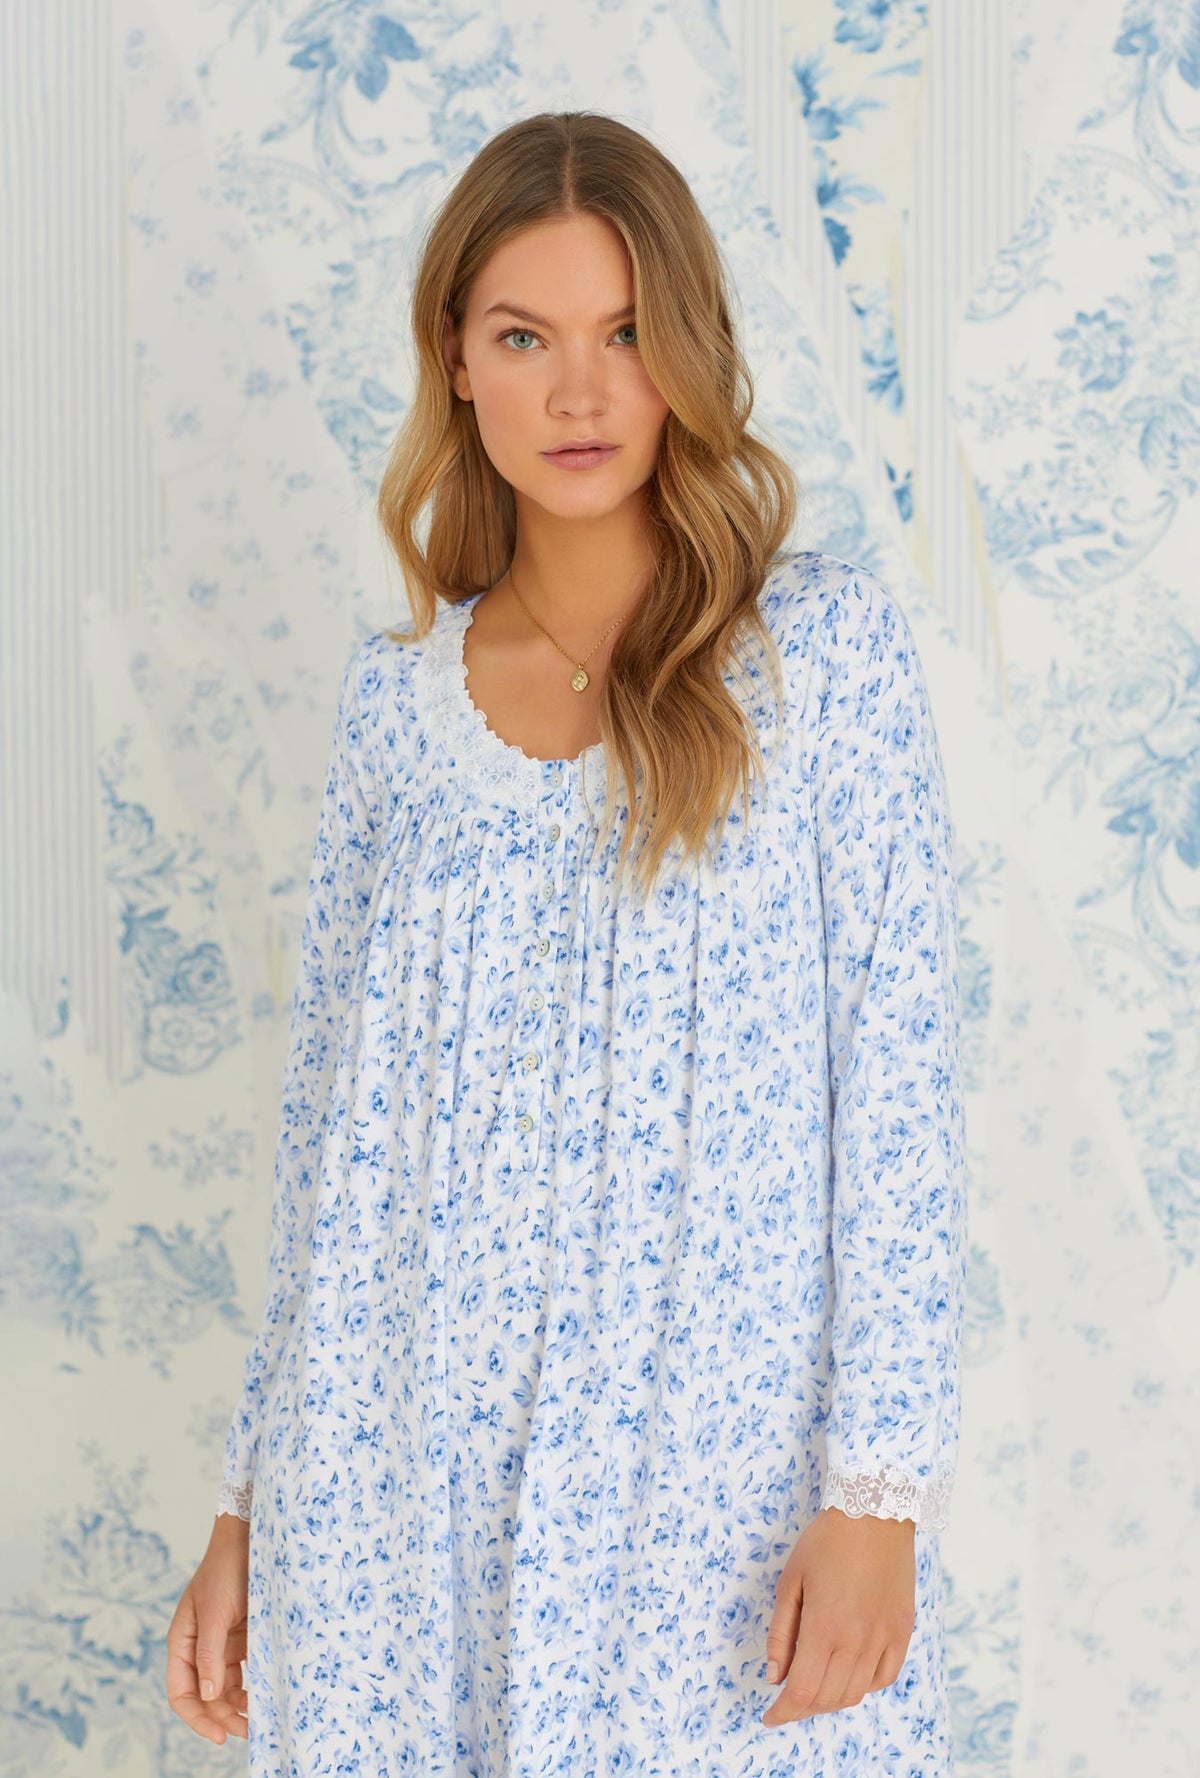 Classic Blue Roses Cozy Sweater Knit Long Nightgown